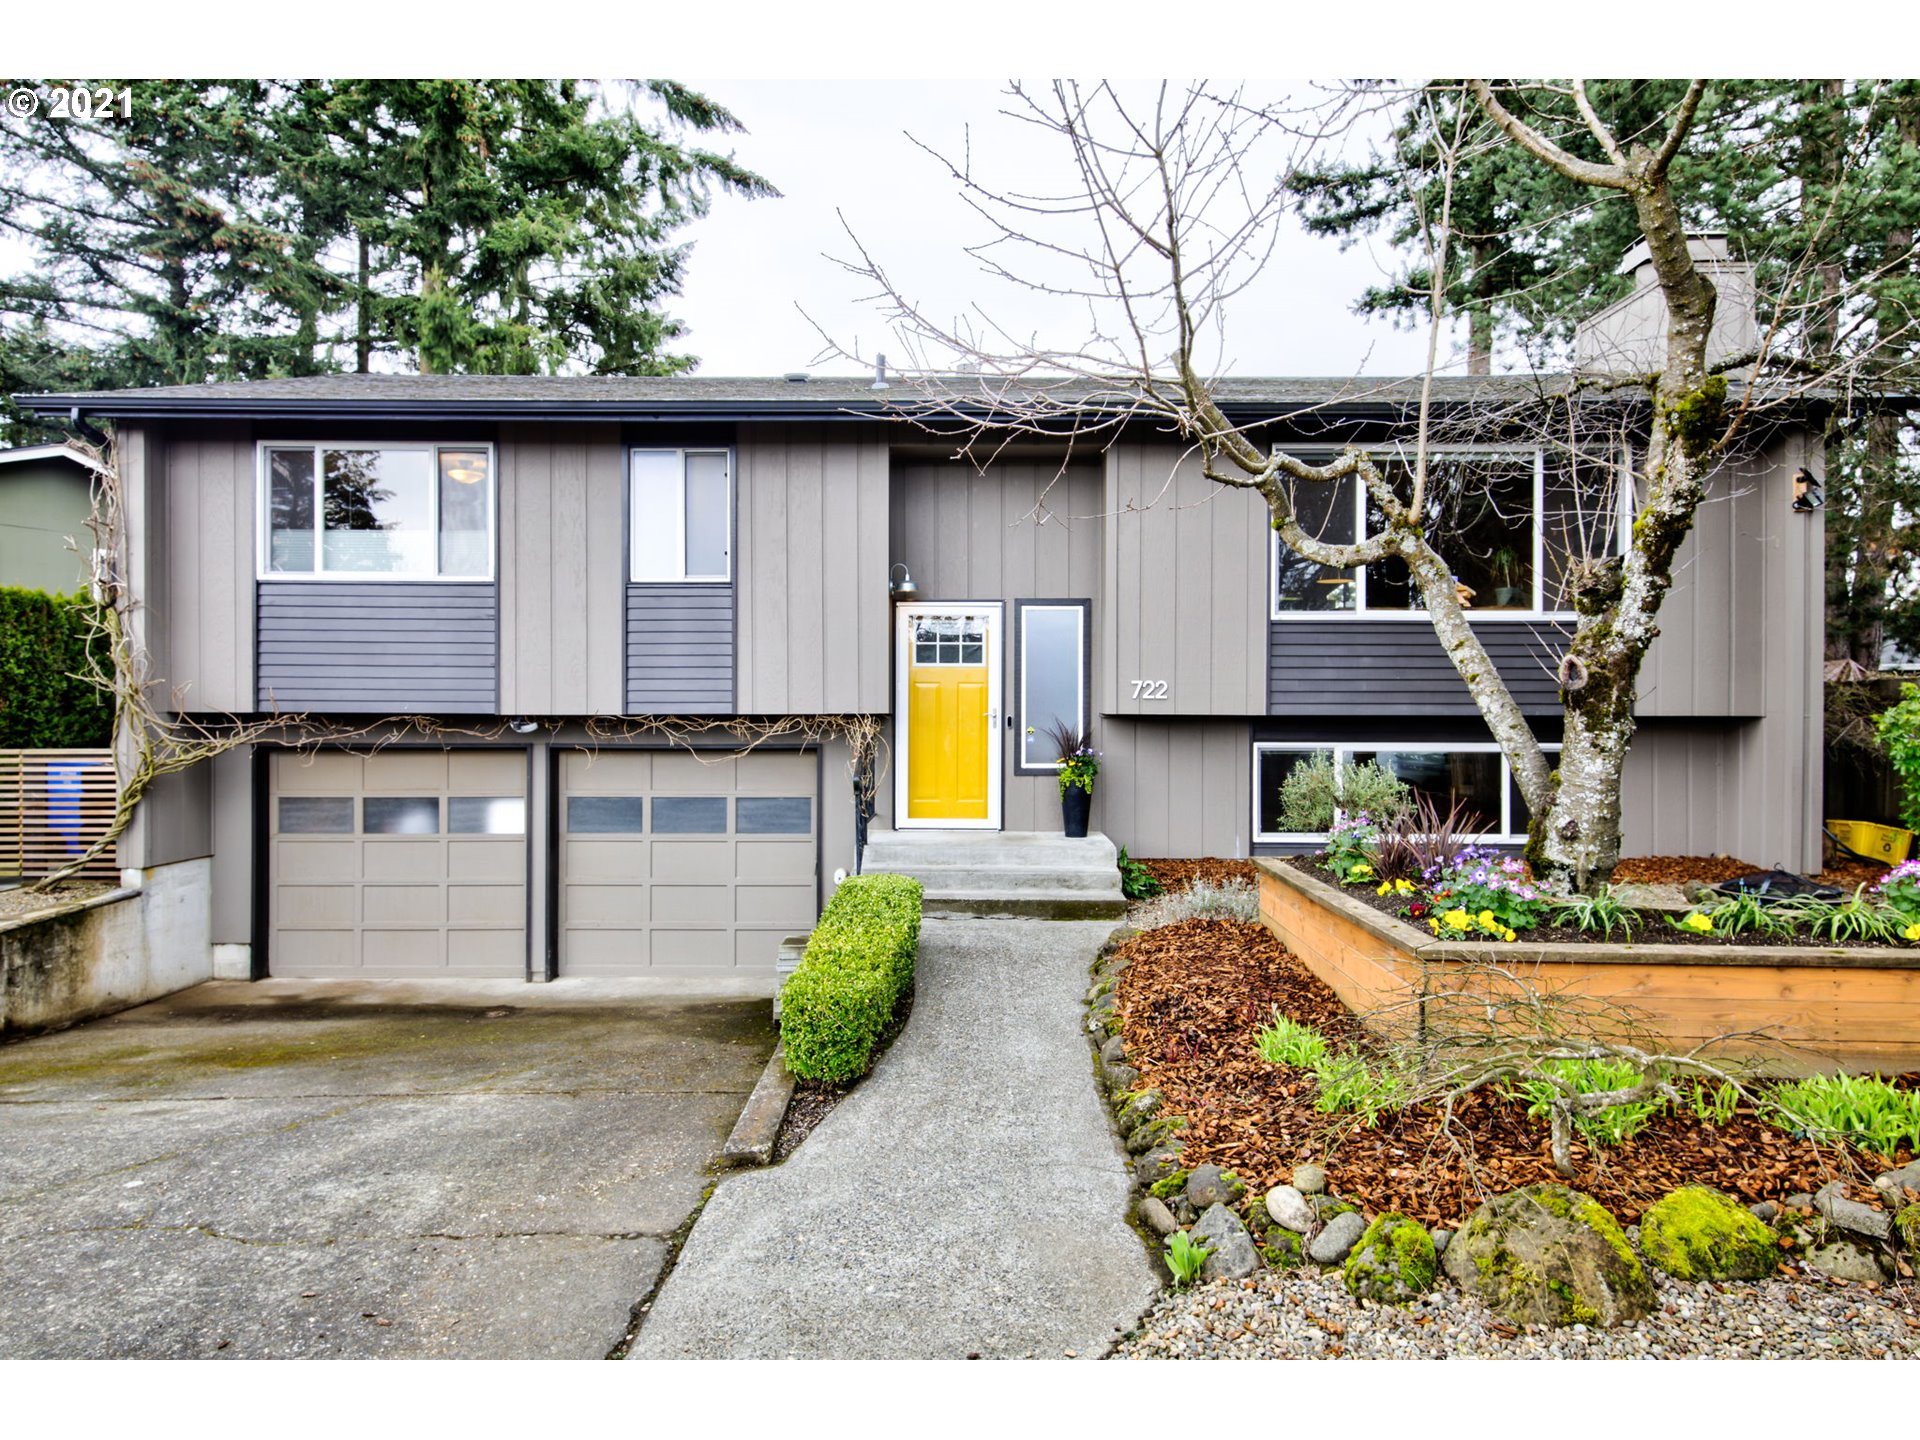 722 SE 128TH AVE (1 of 32)